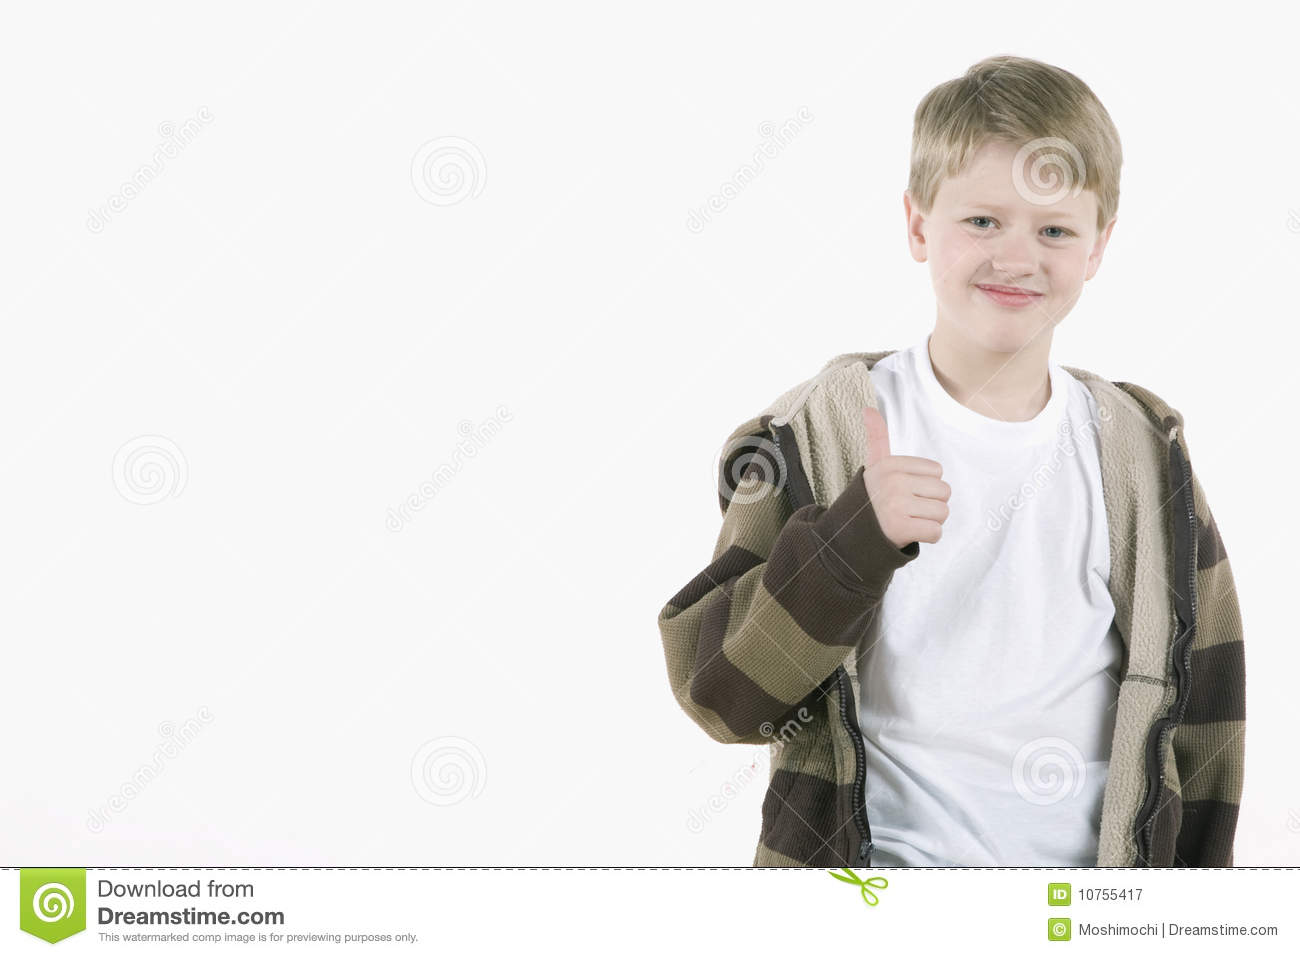 Thumbs Up Dude Royalty Free Stock Photography   Image  10755417